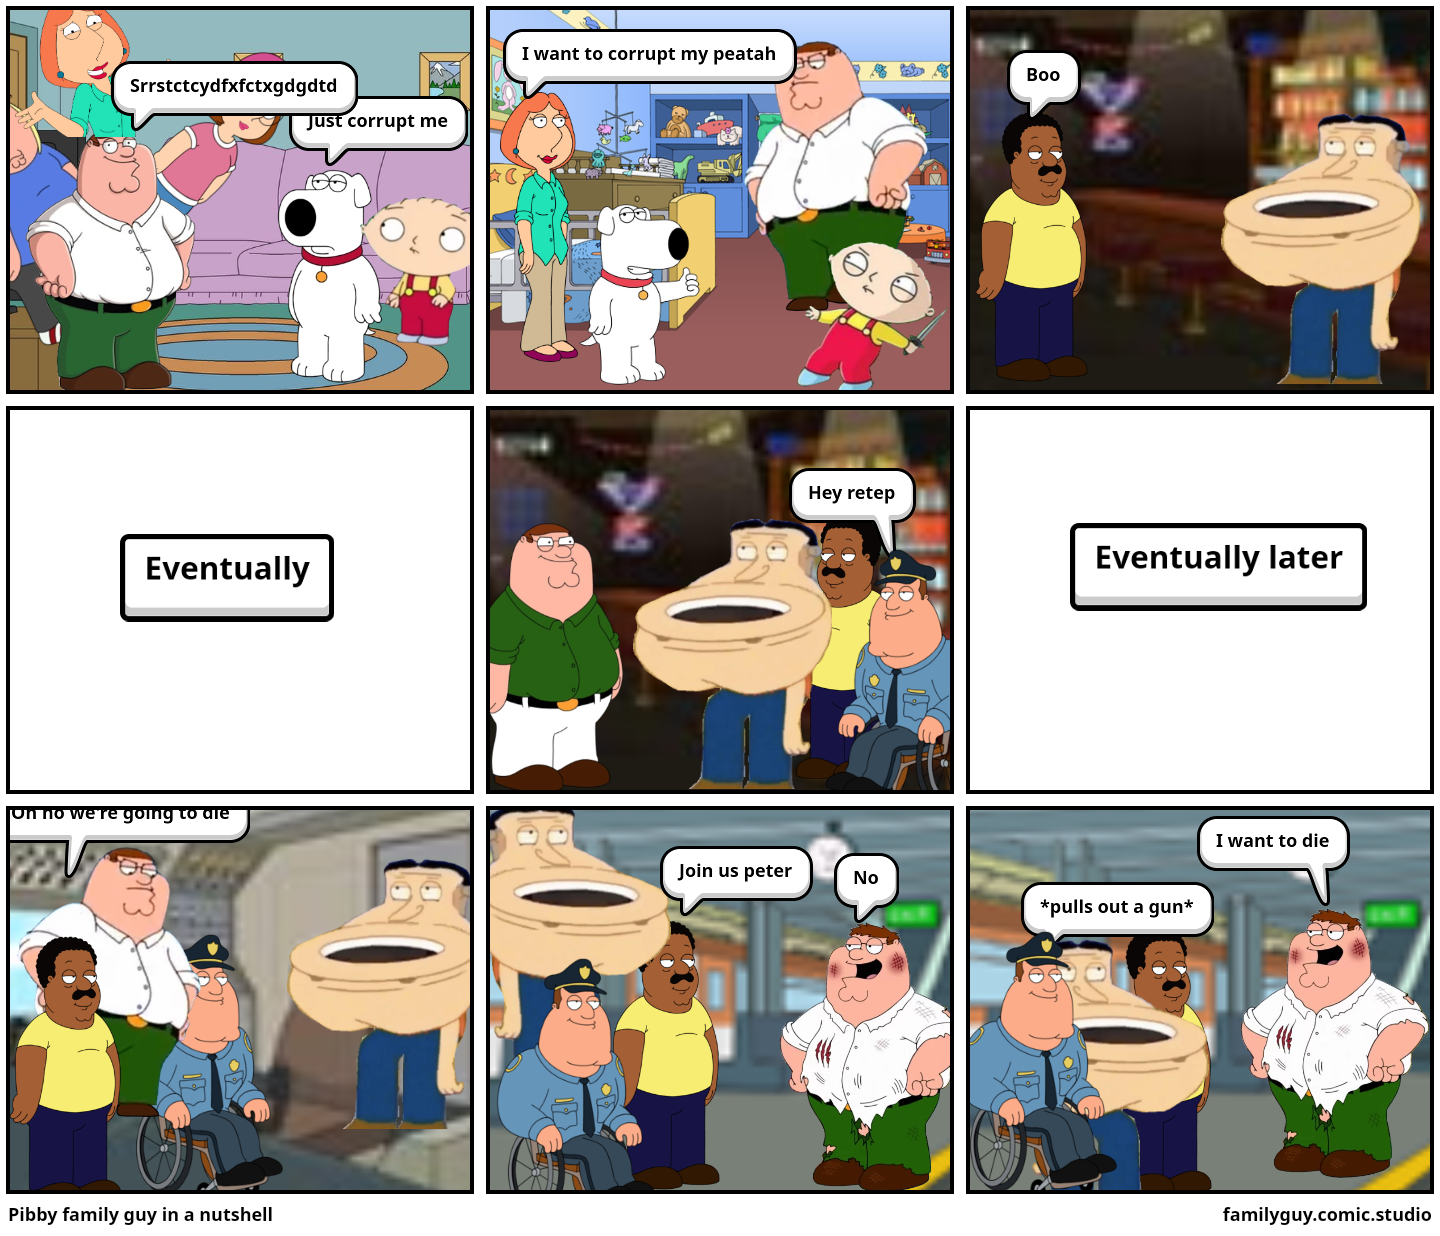 Pibby family guy in a nutshell